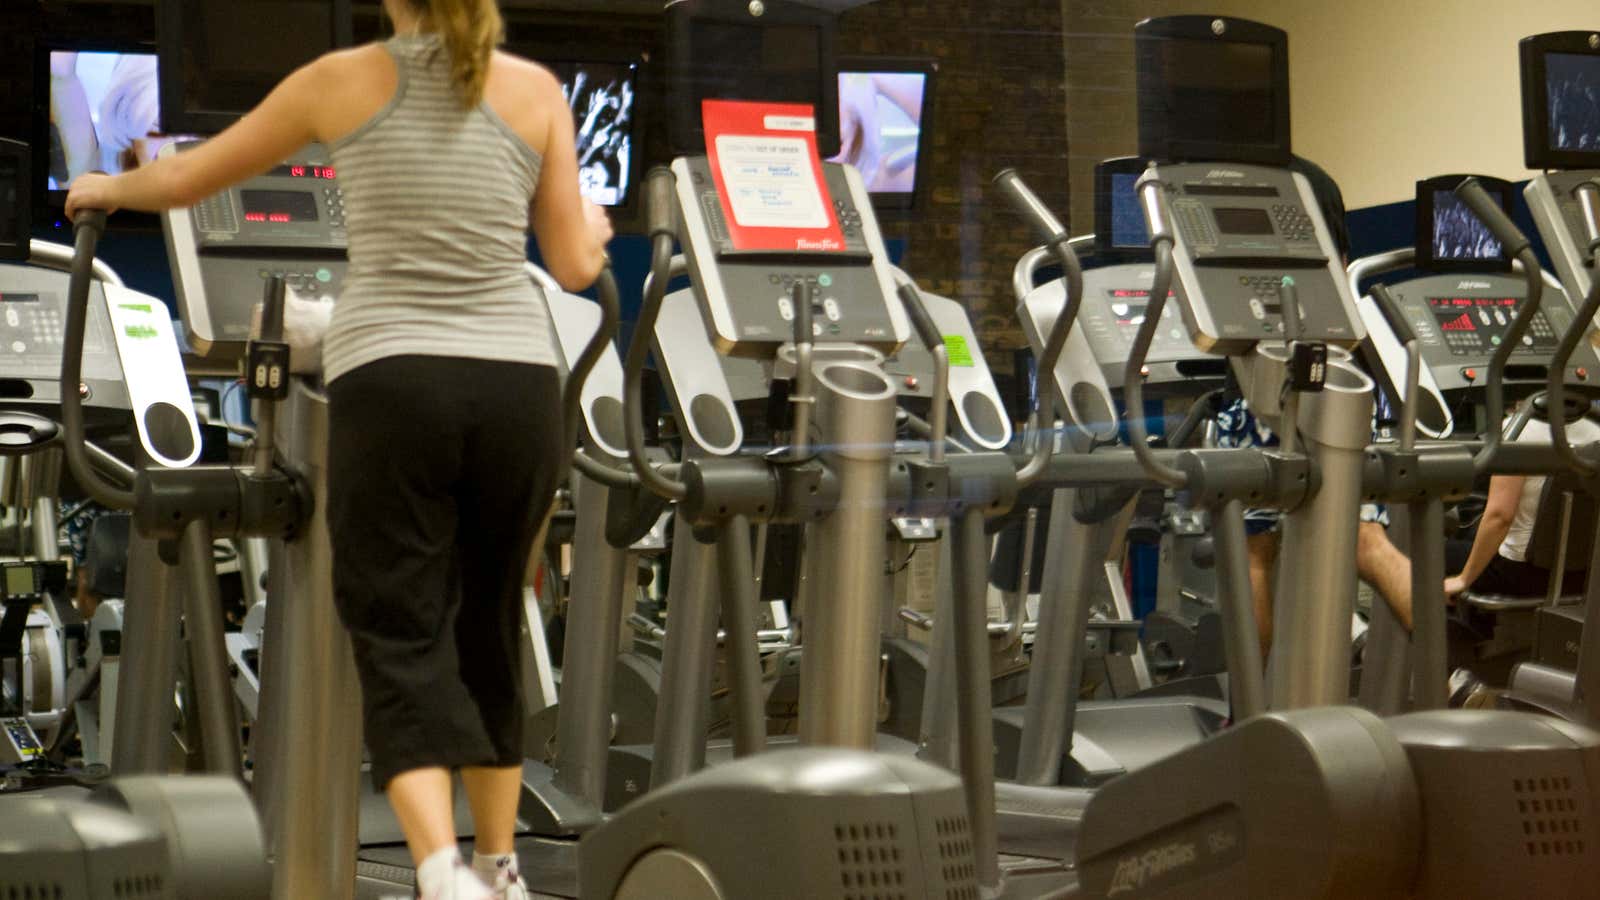 Compared to running, the elliptical also places less stress on muscles and tendons.